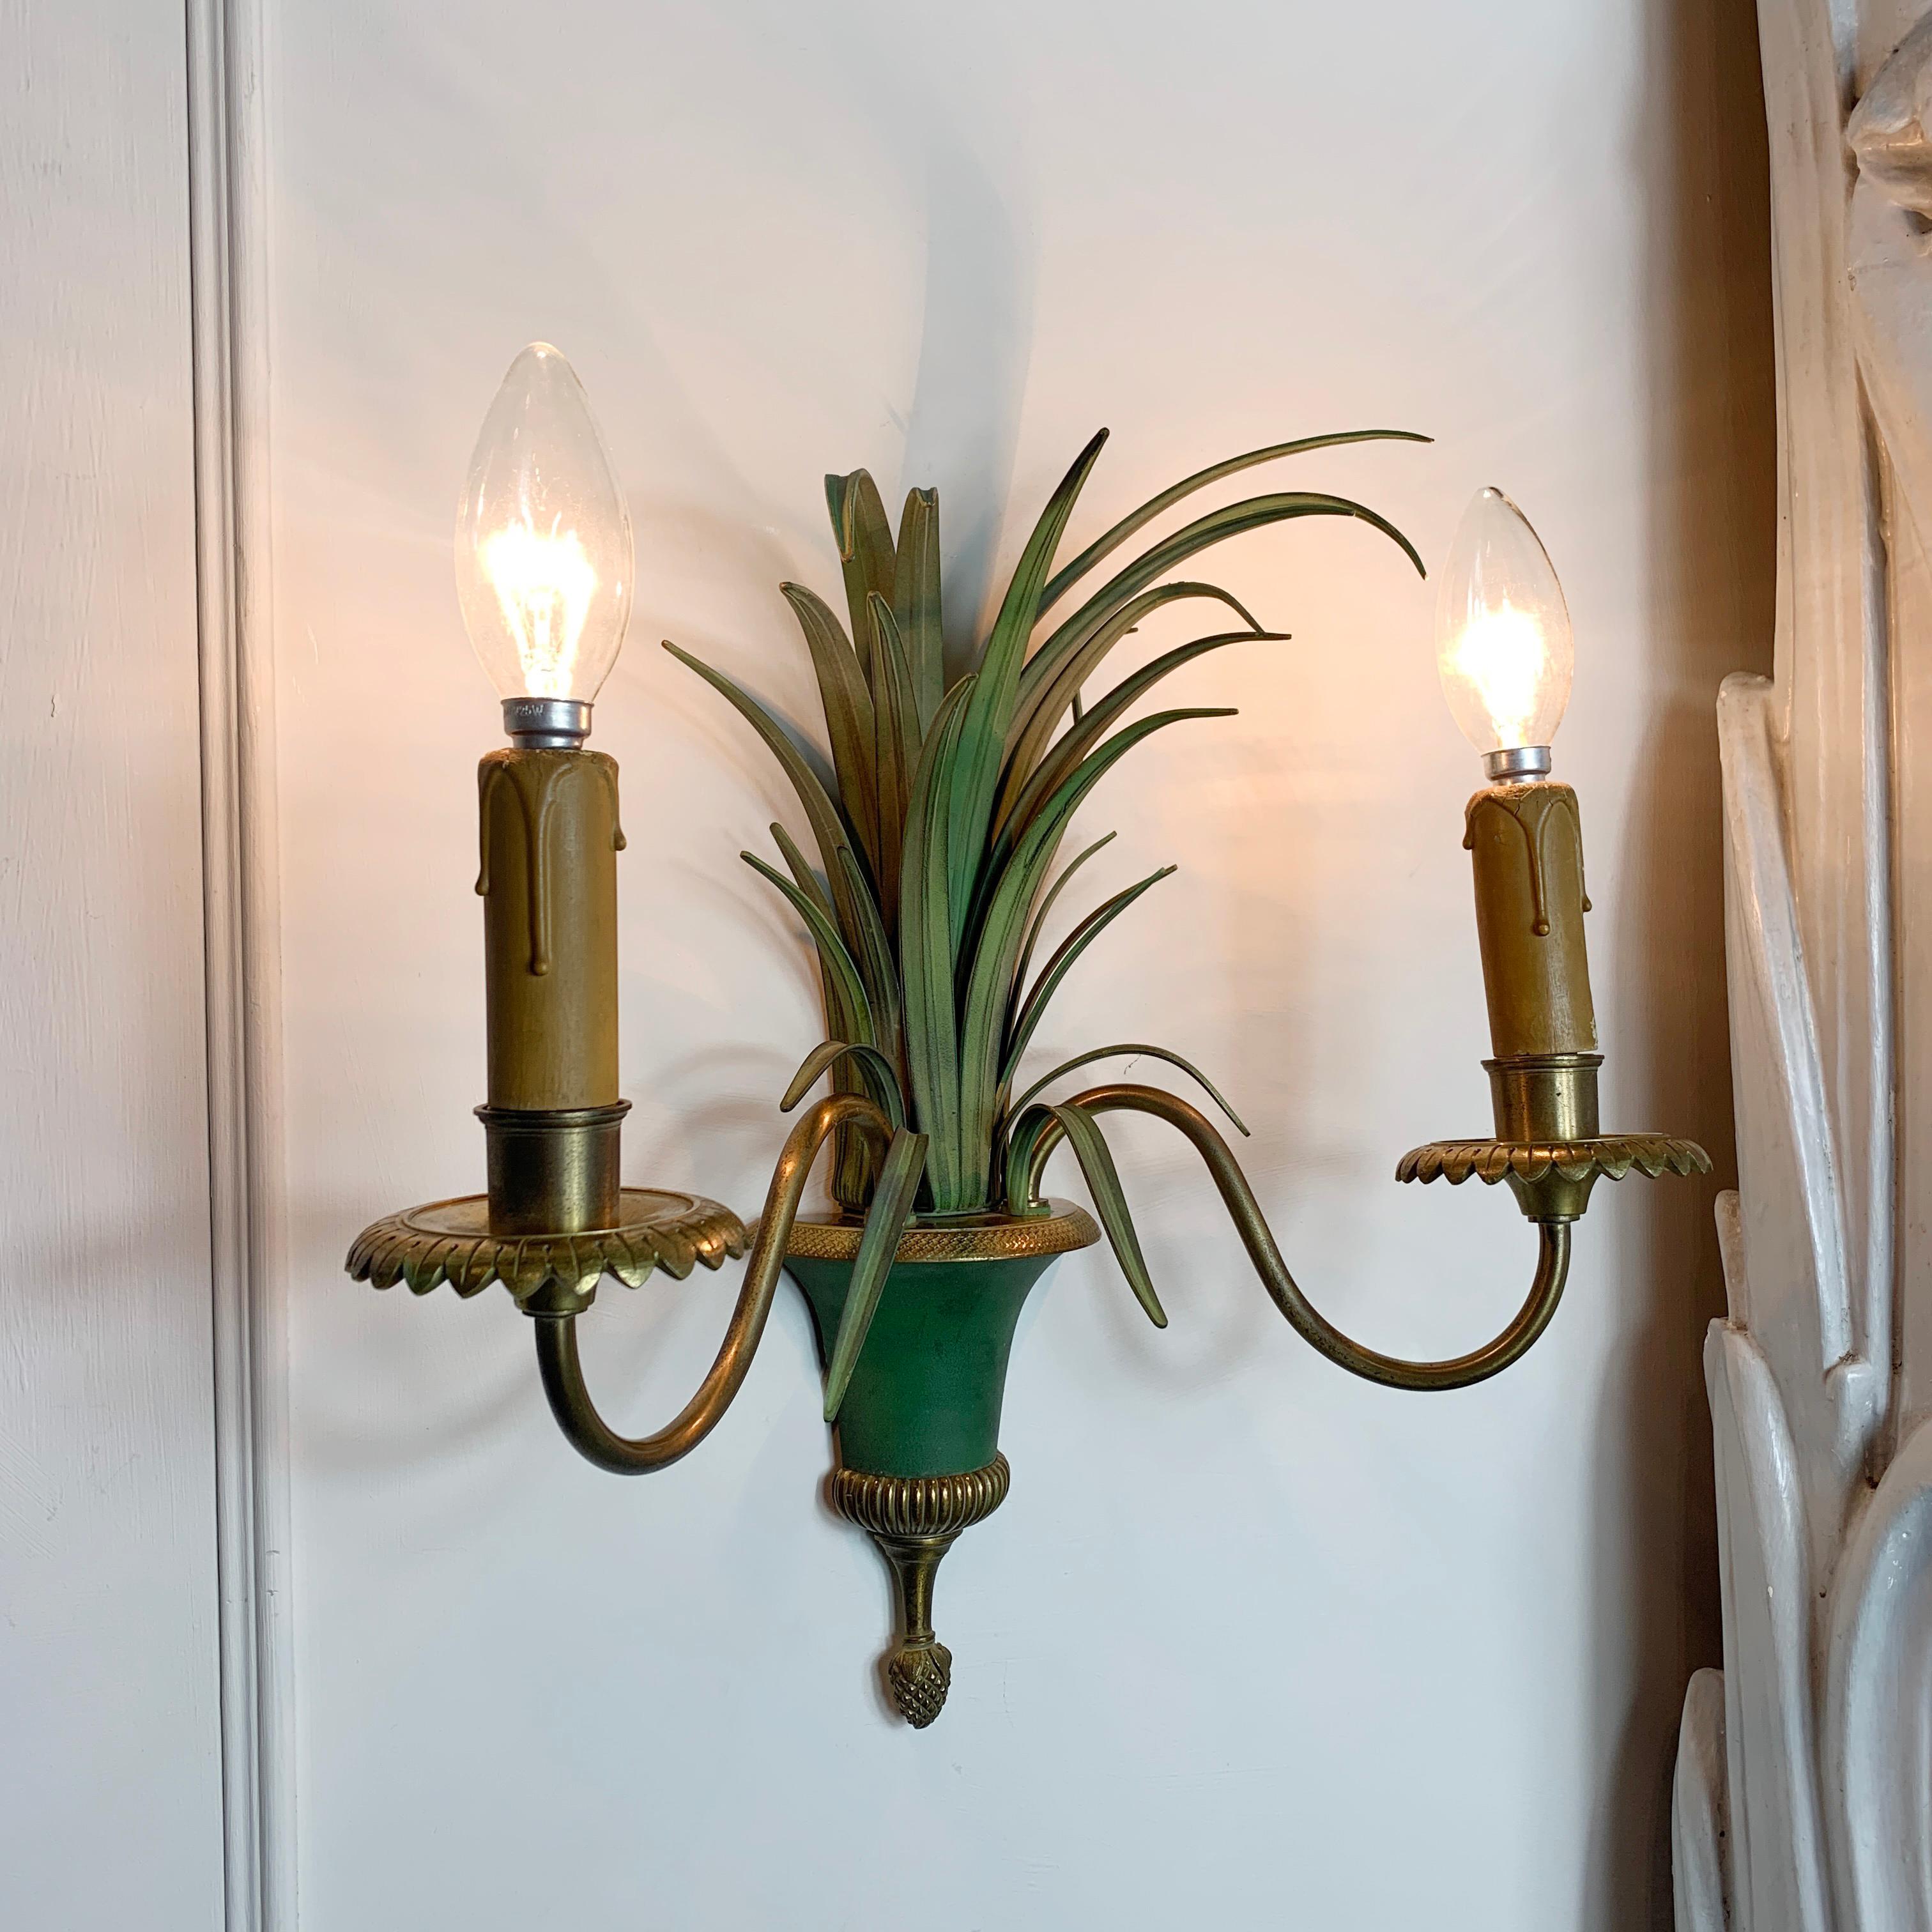 Maison Charles signed wall applique
Made in France, circa 1970
In the directoire style, with naturalistic Verde foliage detailing and contrasting brass body
Double lamp holders e14
Fully stamped with makers mark, Charles
In excellent vintage